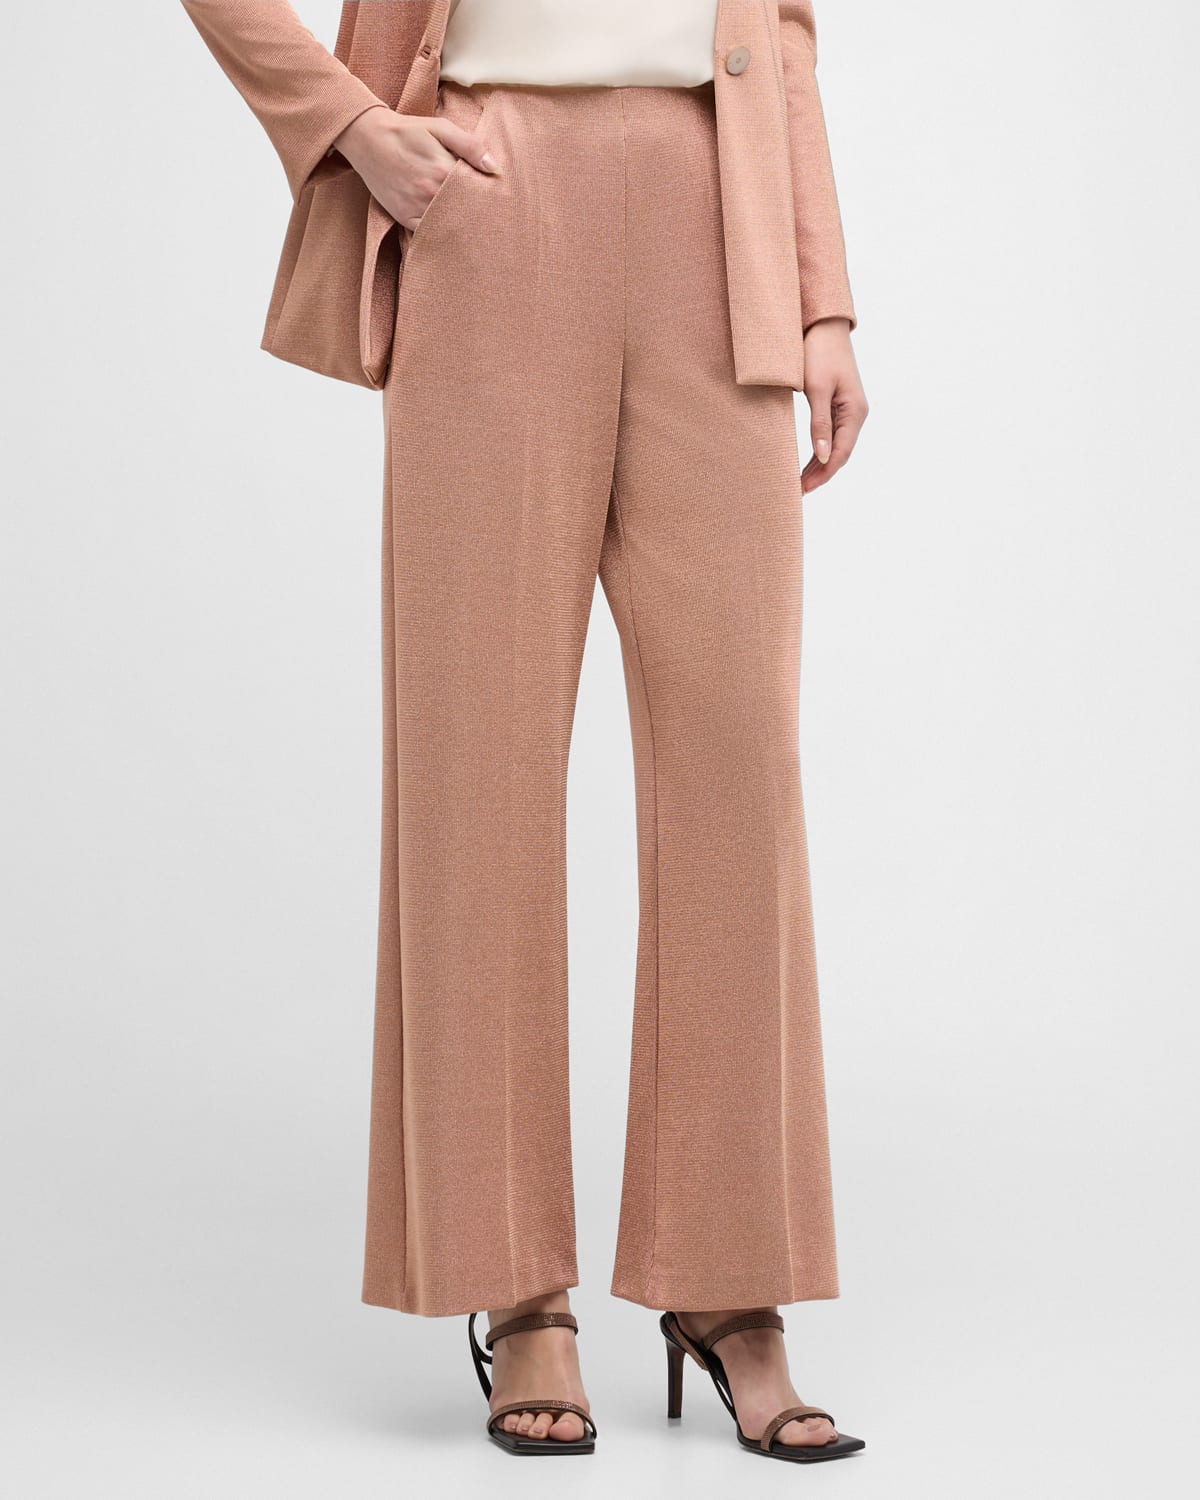 Shop Giorgio Armani Lurex Bonded Jersey Trousers In Solid Light/pastel P